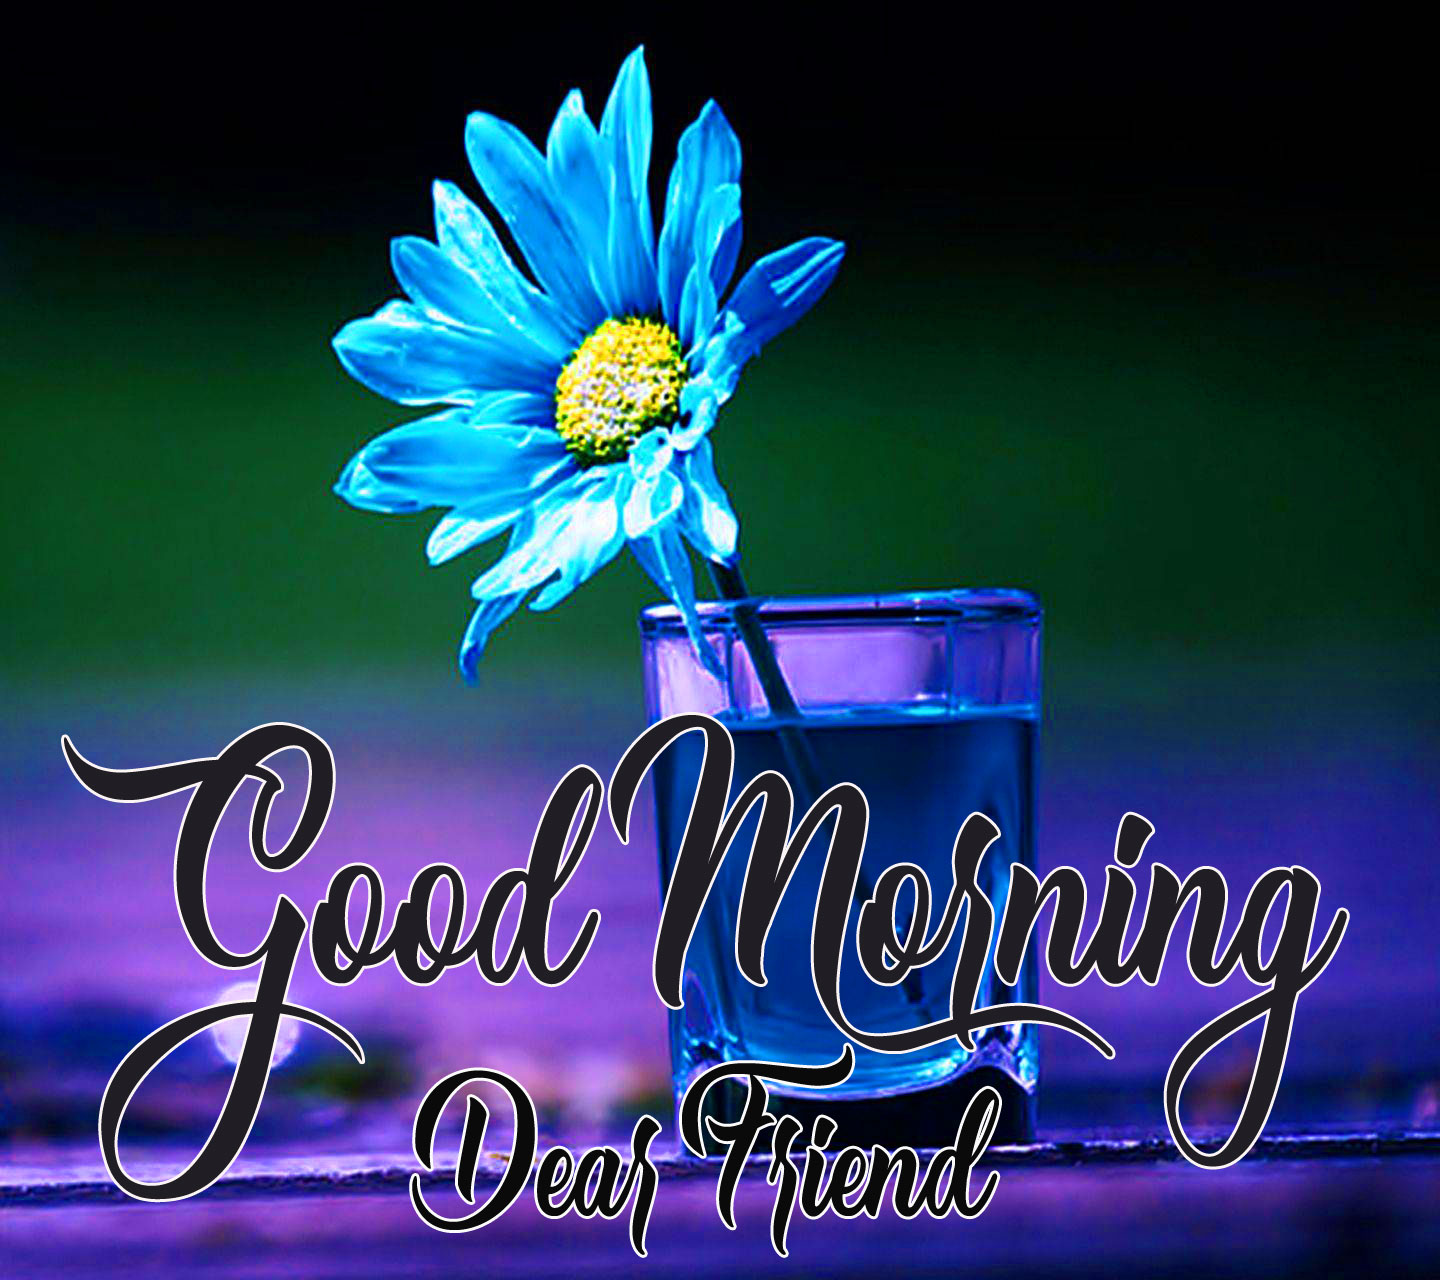 good morning have a nice day image download